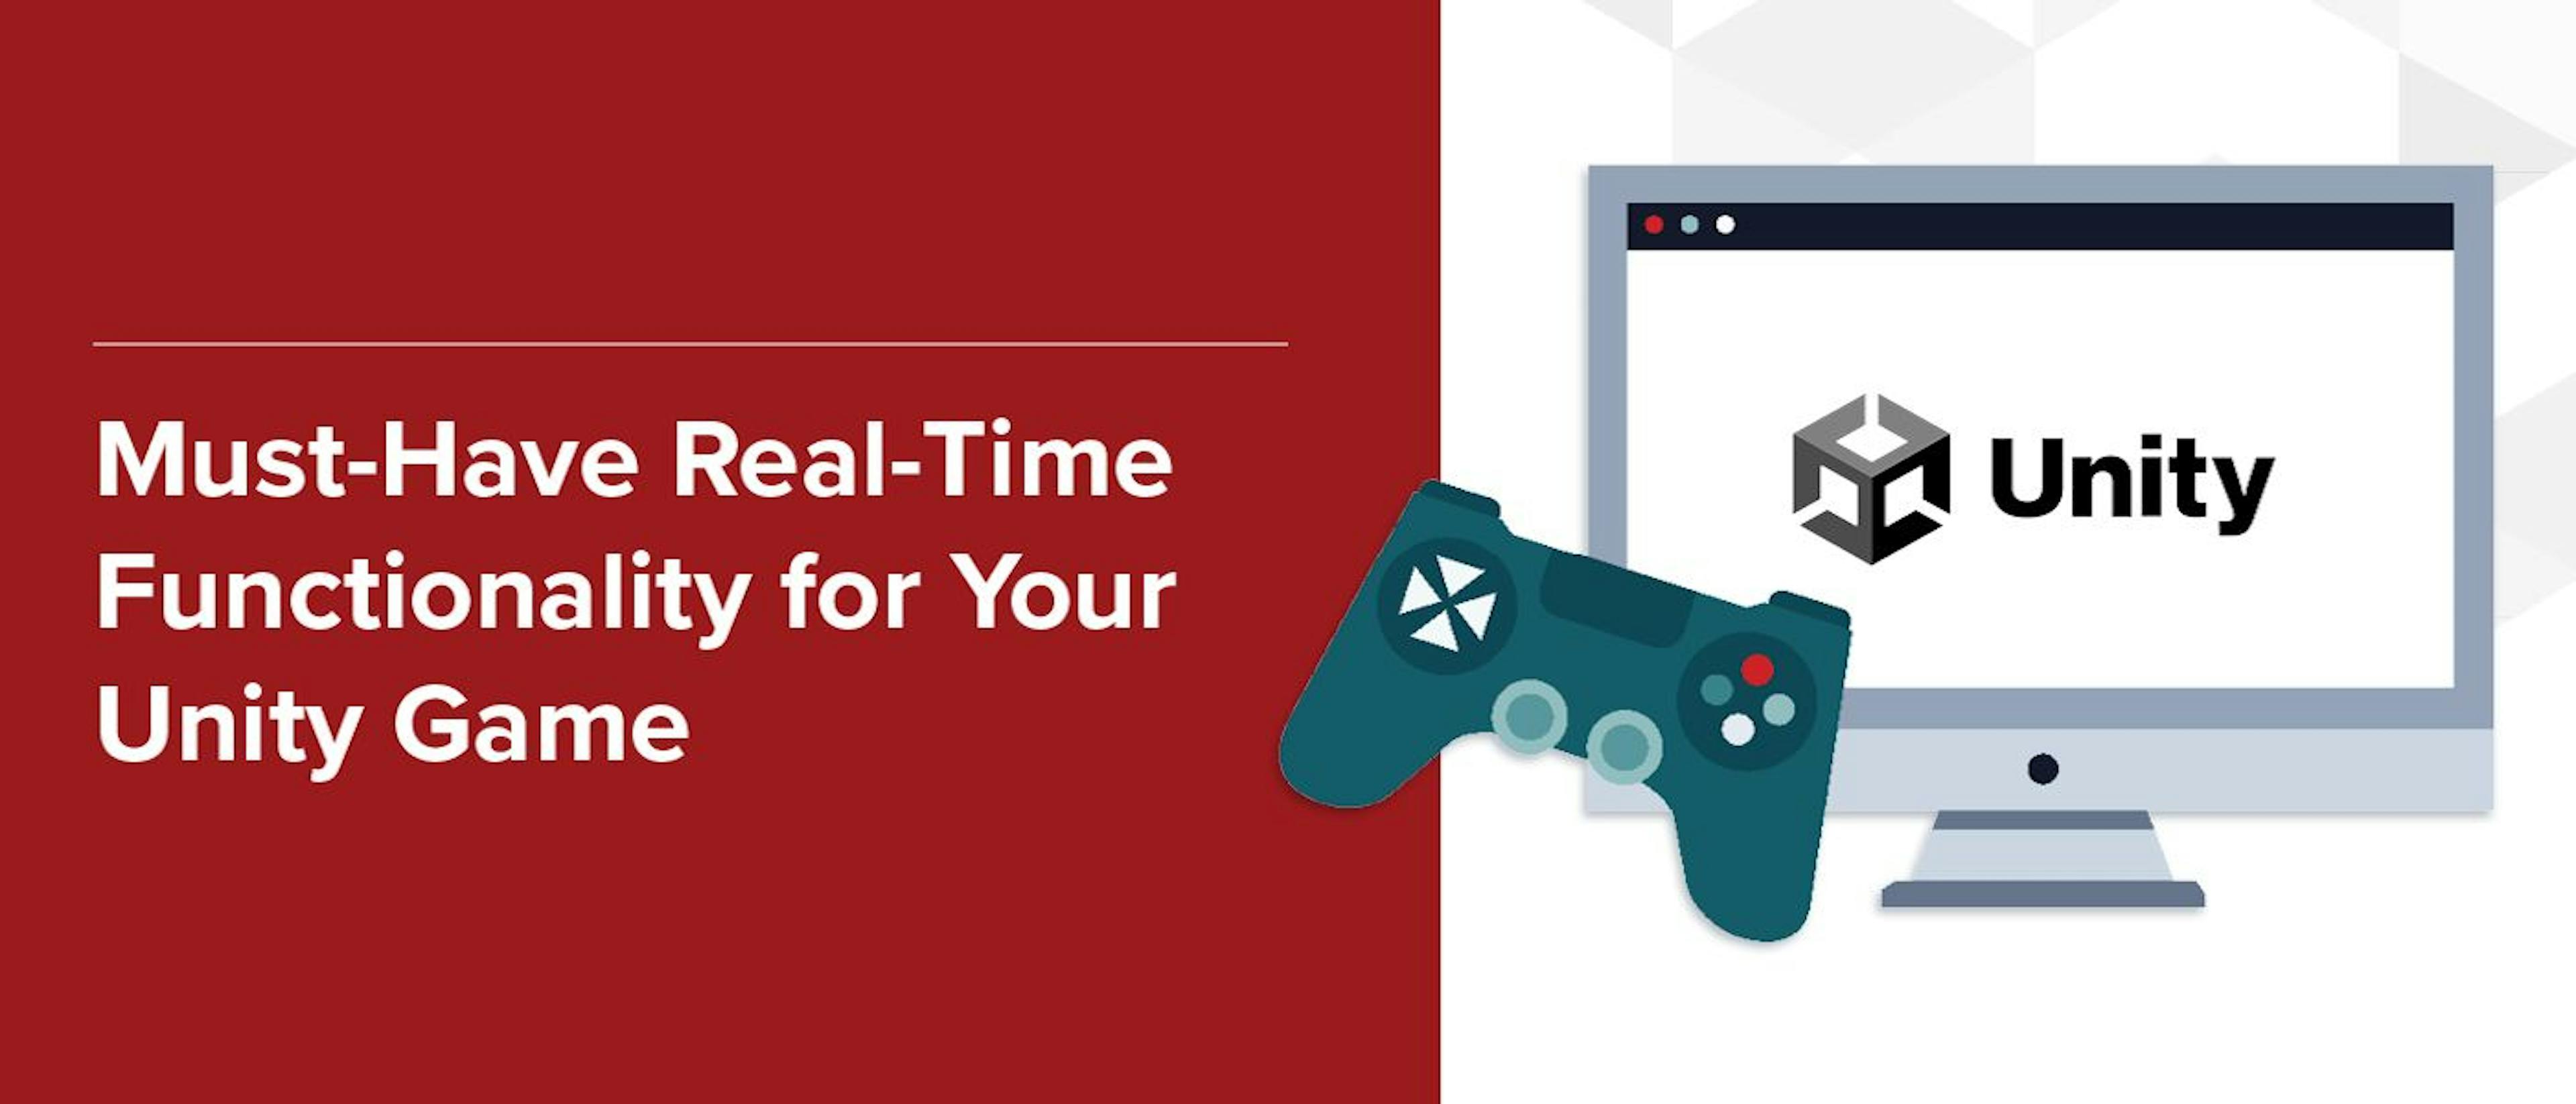 featured image - Must-Have Real-Time Functionality for Your Unity Game